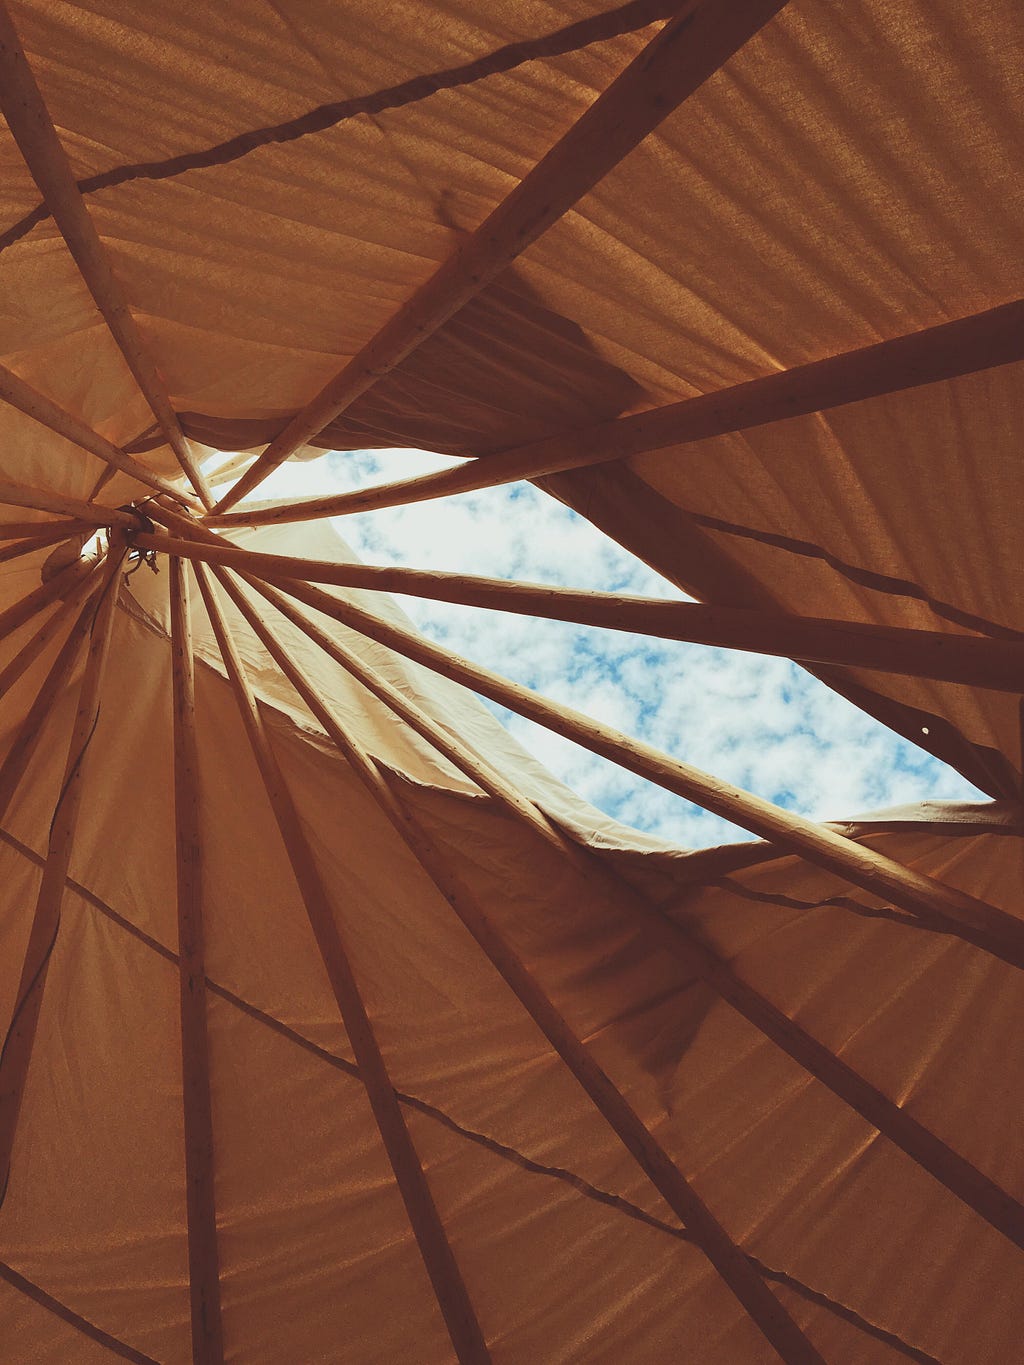 The inside of a teepee during Indigenous Peoples’ Day.